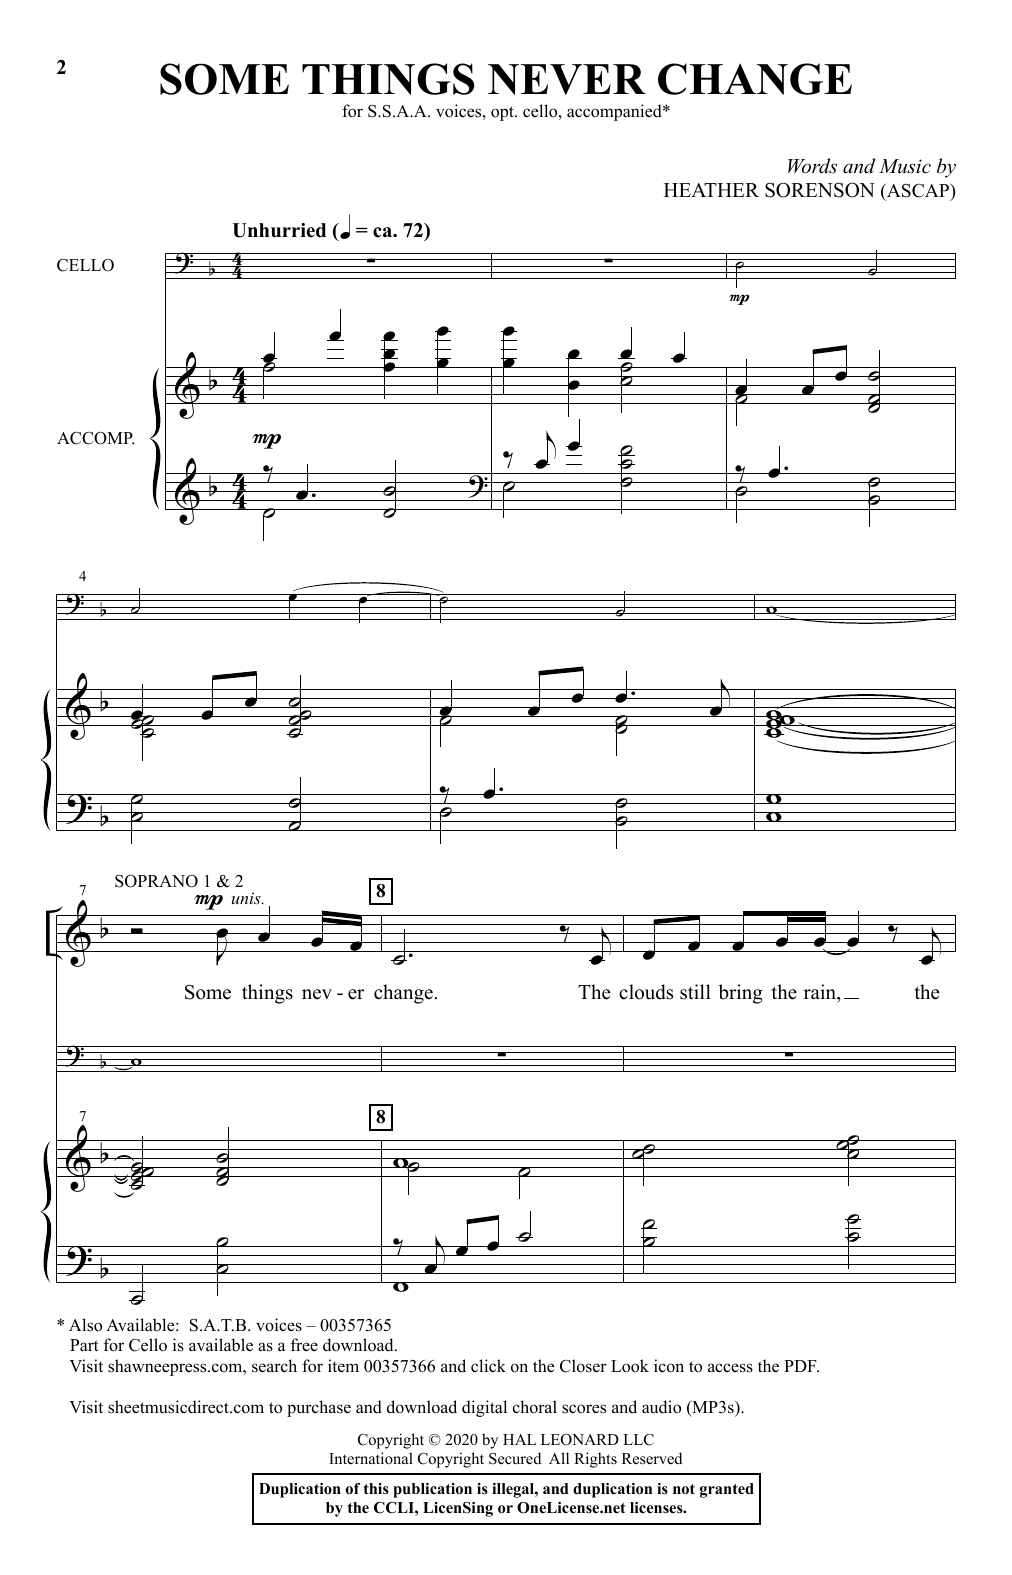 Download Heather Sorenson Some Things Never Change Sheet Music